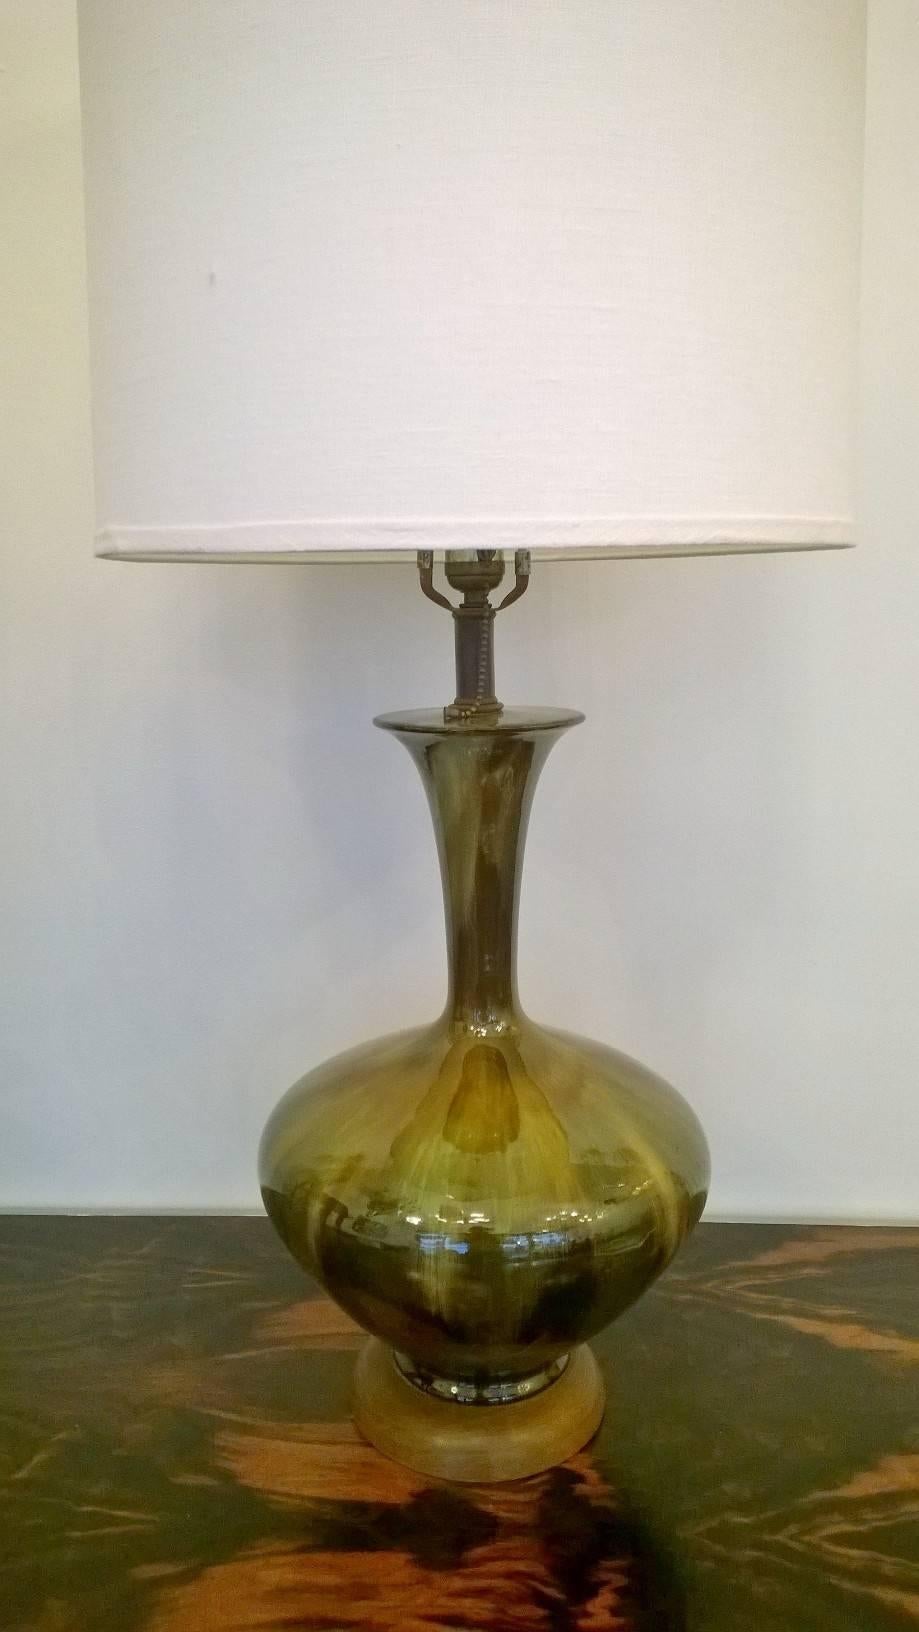 An original pair of 1950s Italian art pottery lamps done in shades of green with walnut bases.